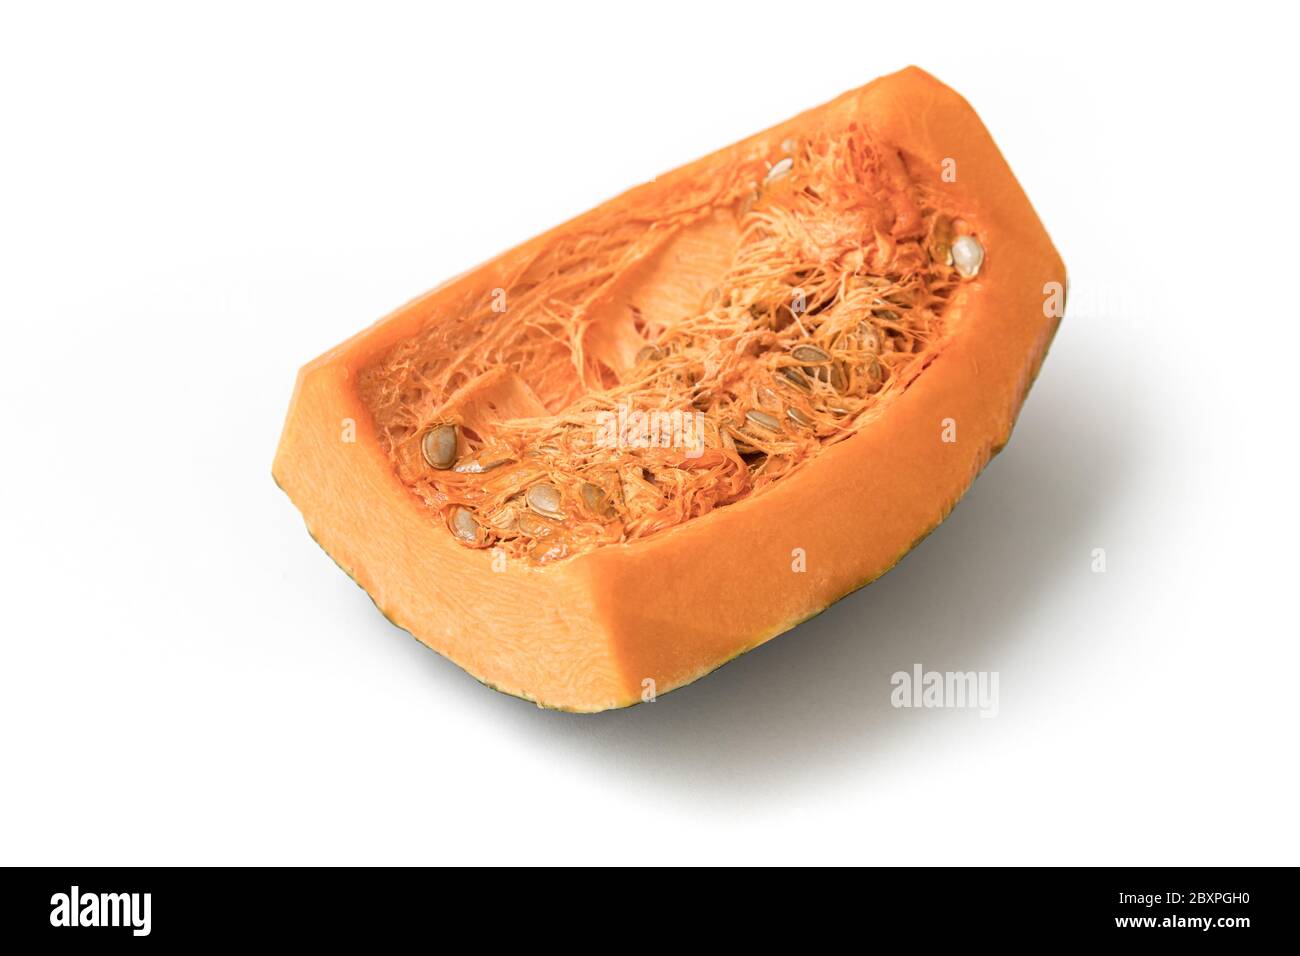 Piece of Pumpkin with seeds isolated on white background Stock Photo